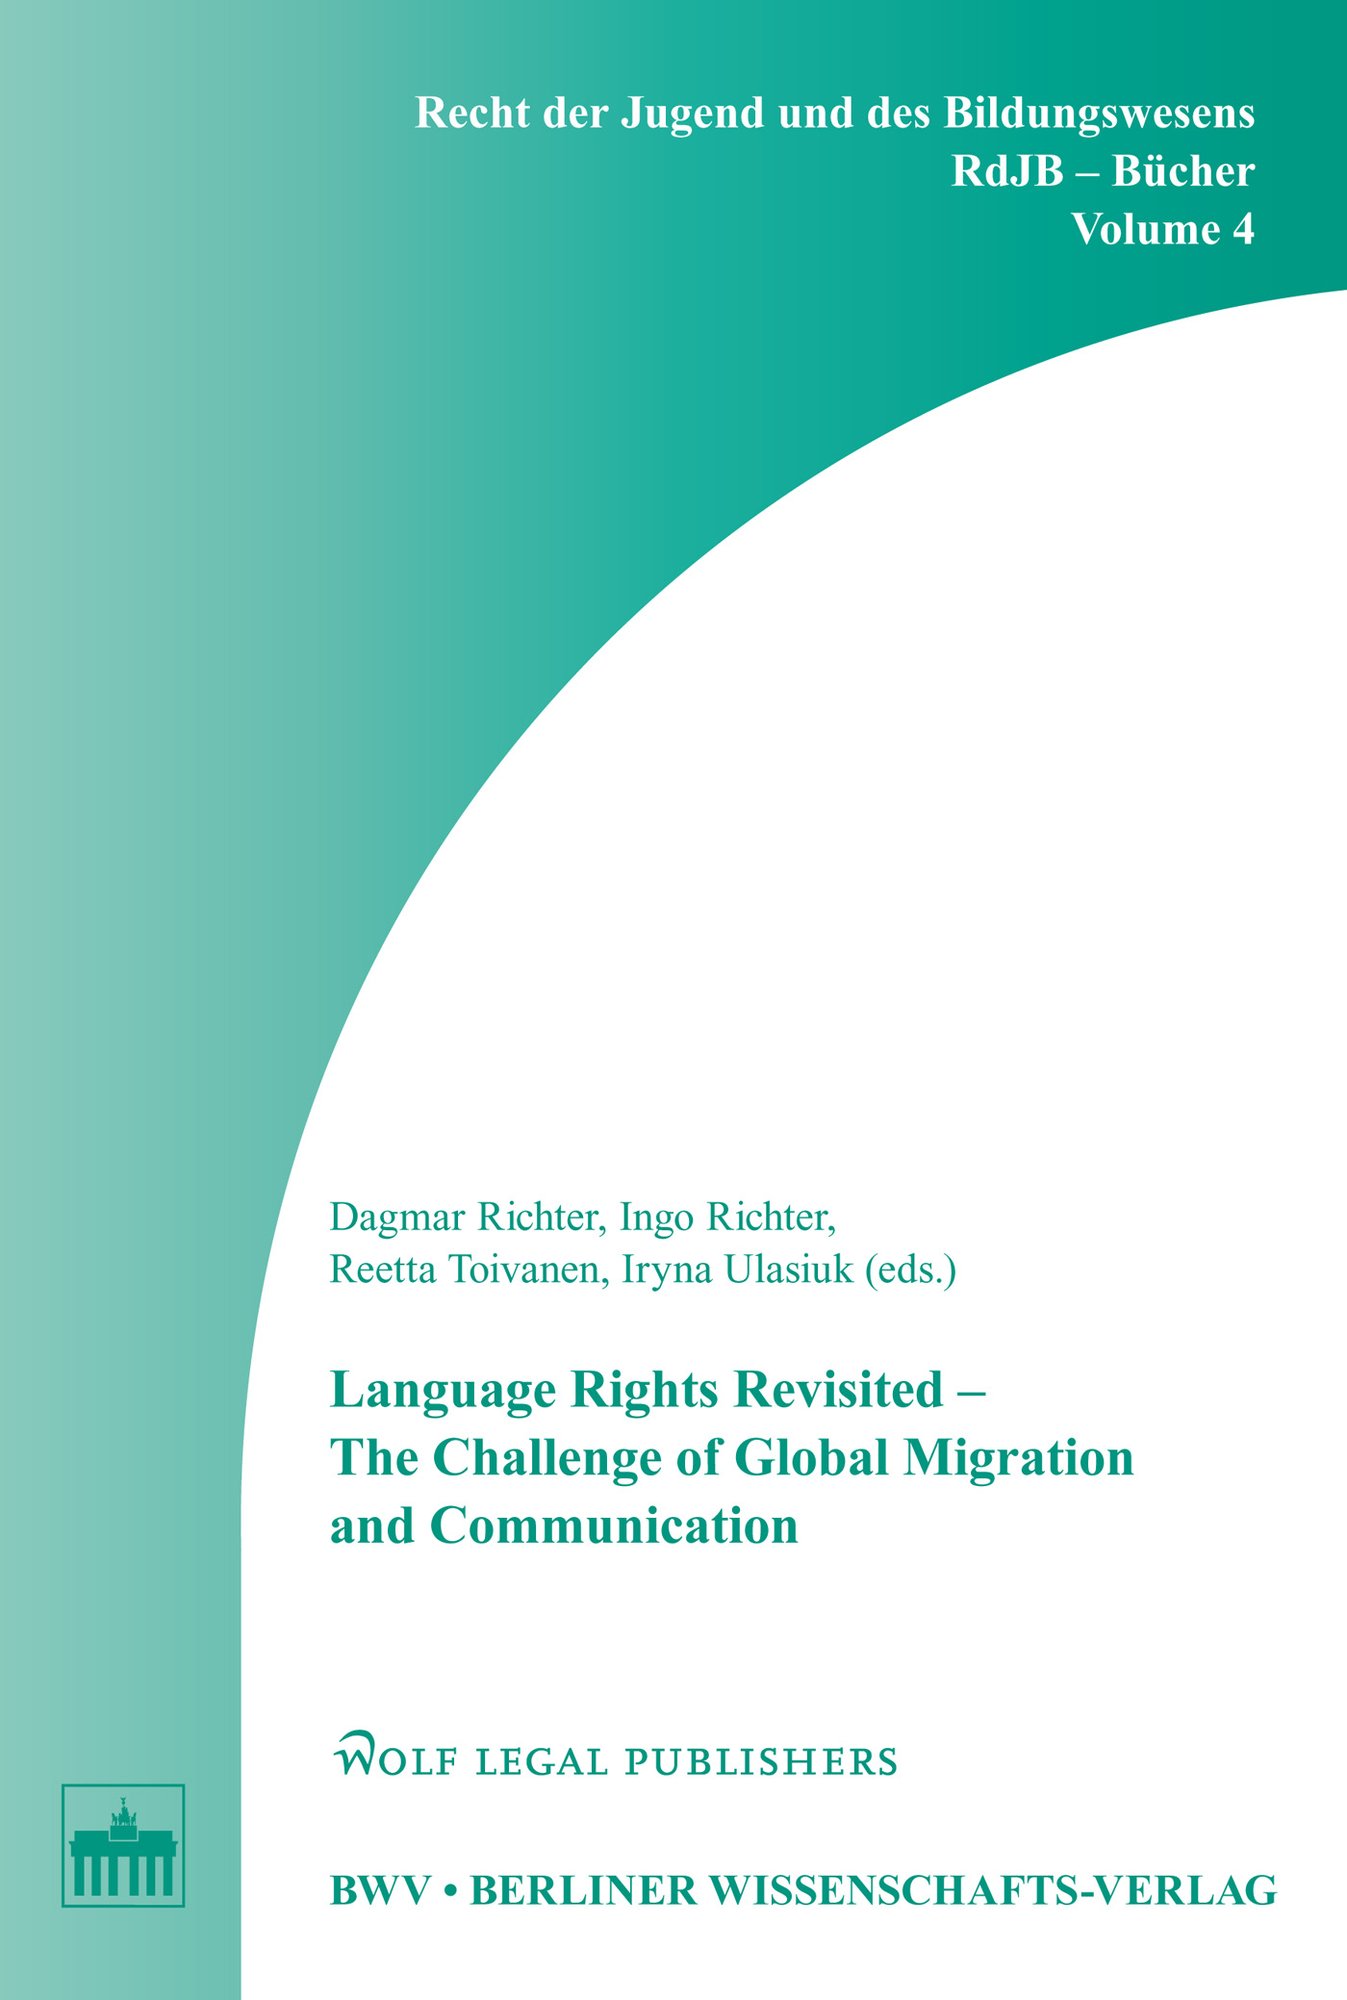 Language Rights Revisited - The Challenge of Global Migration and Communication